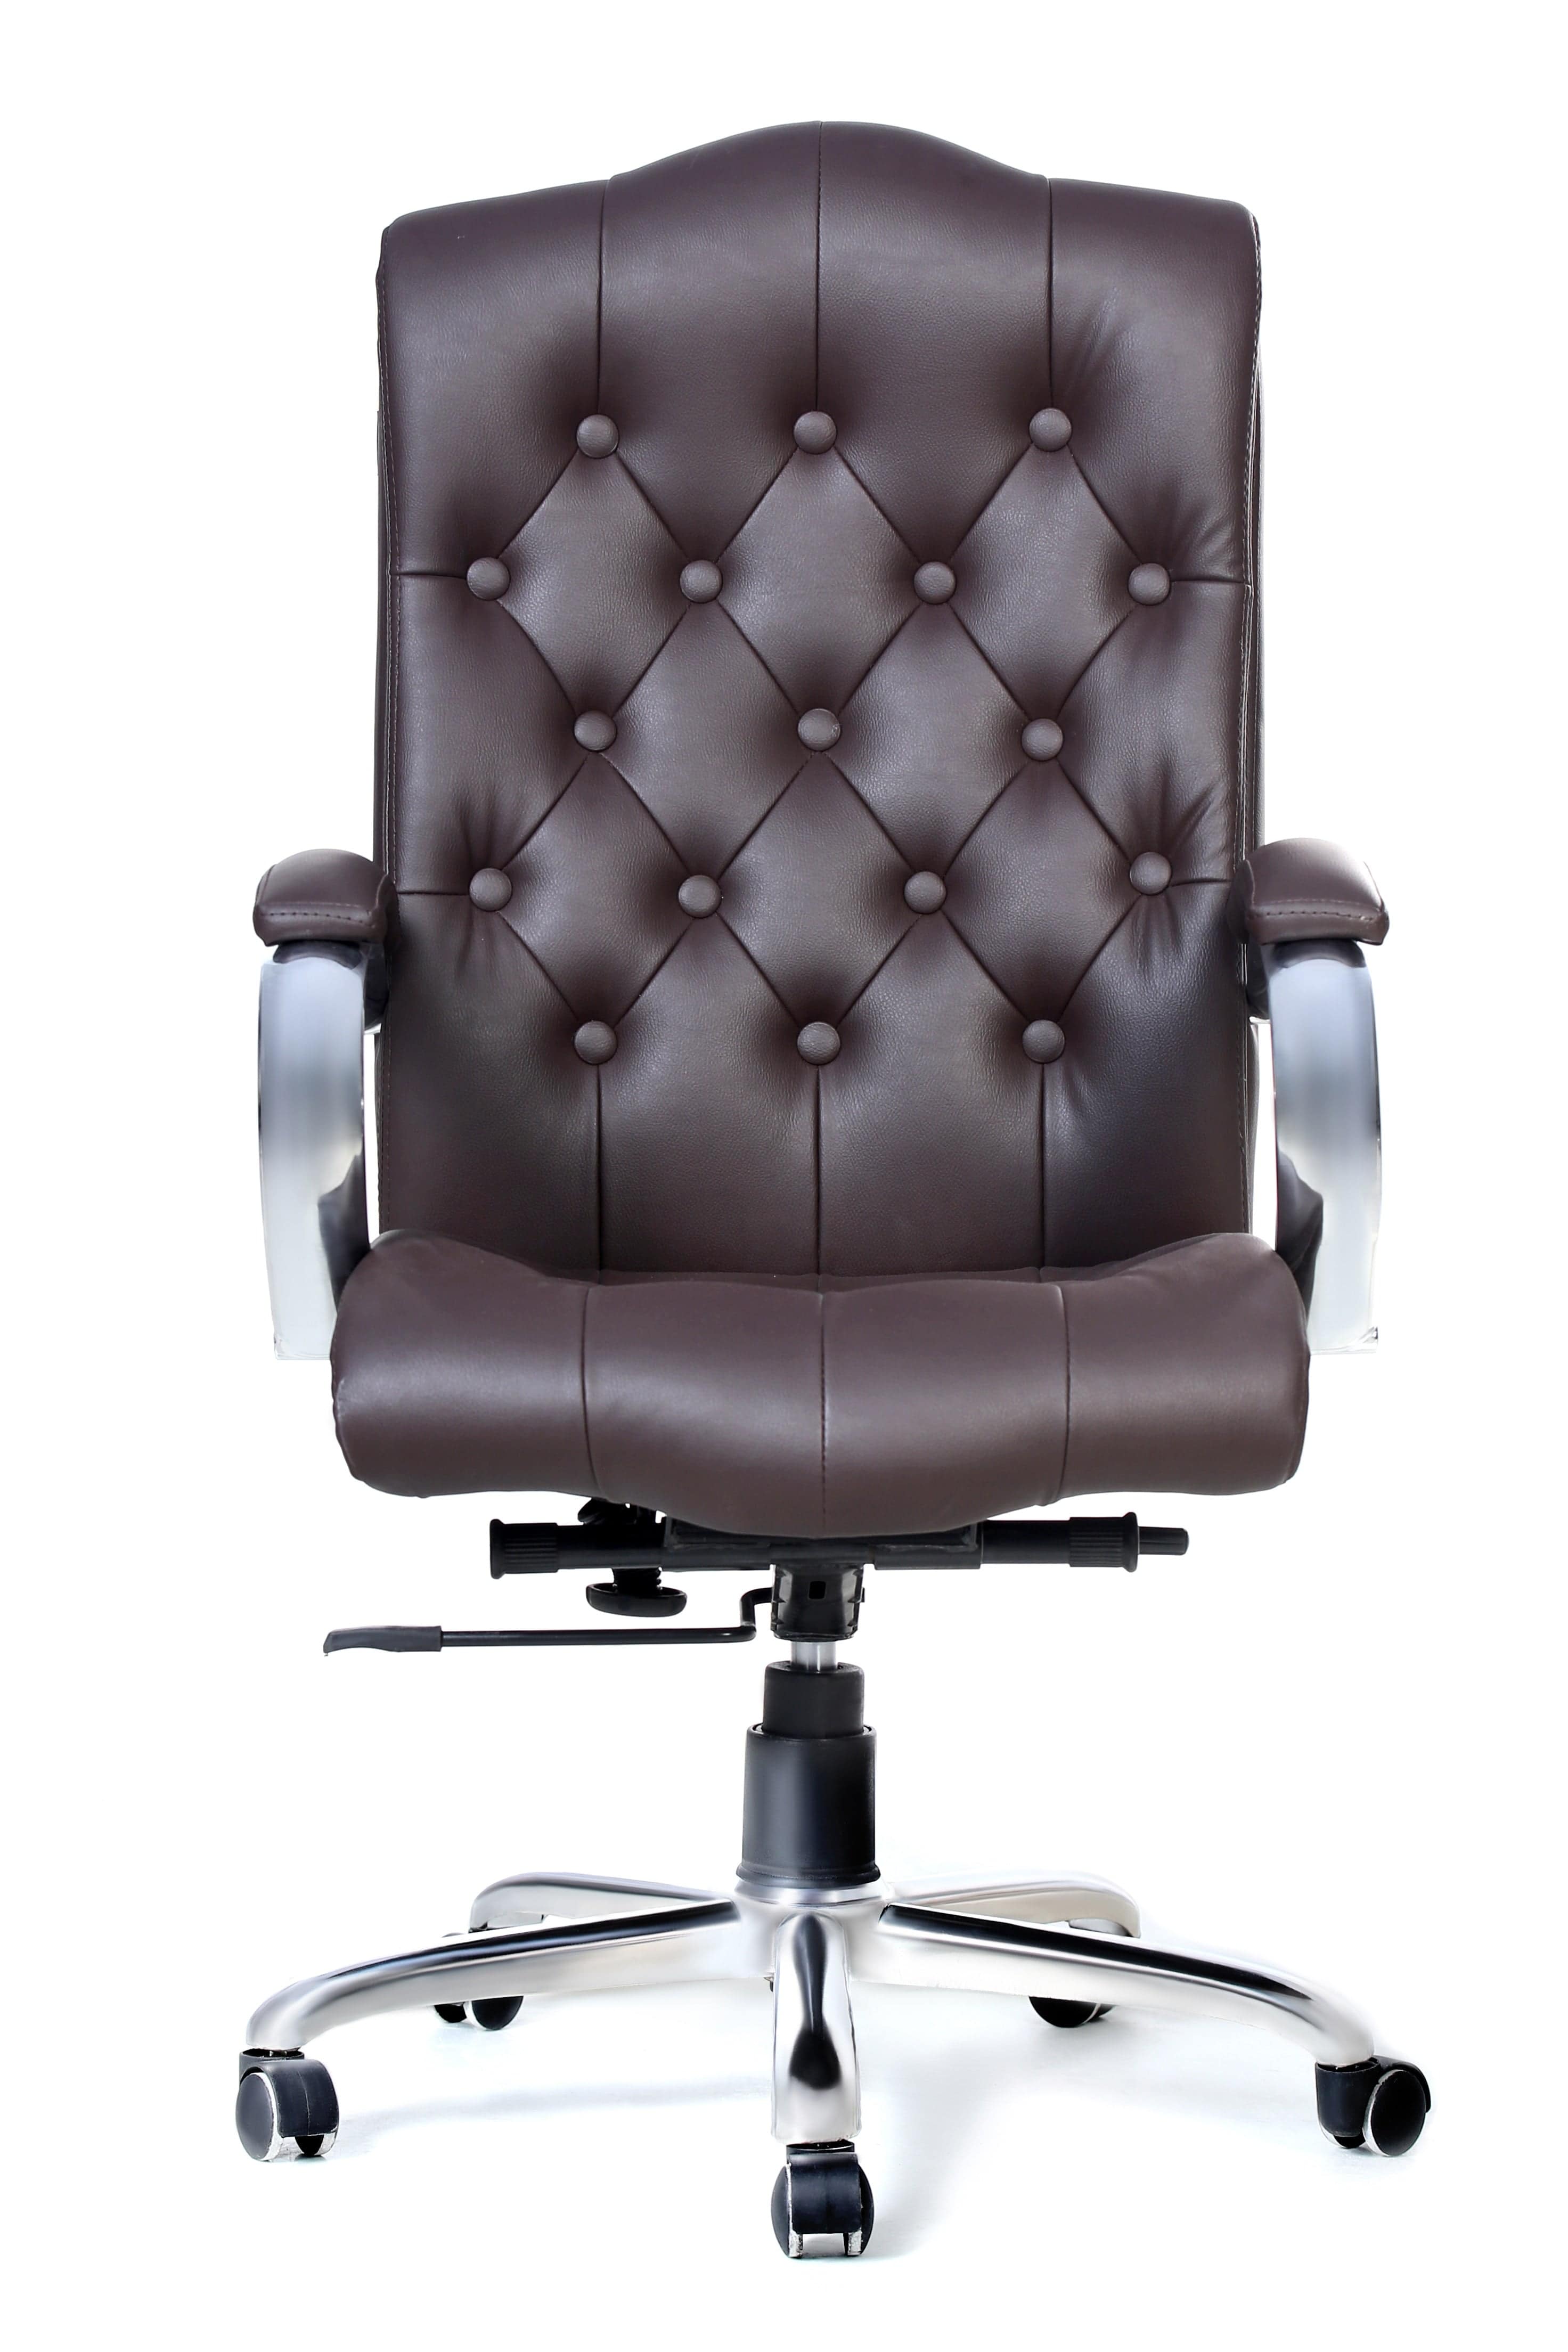 Adiko Classic Executive Revolving Office Chair in Brown